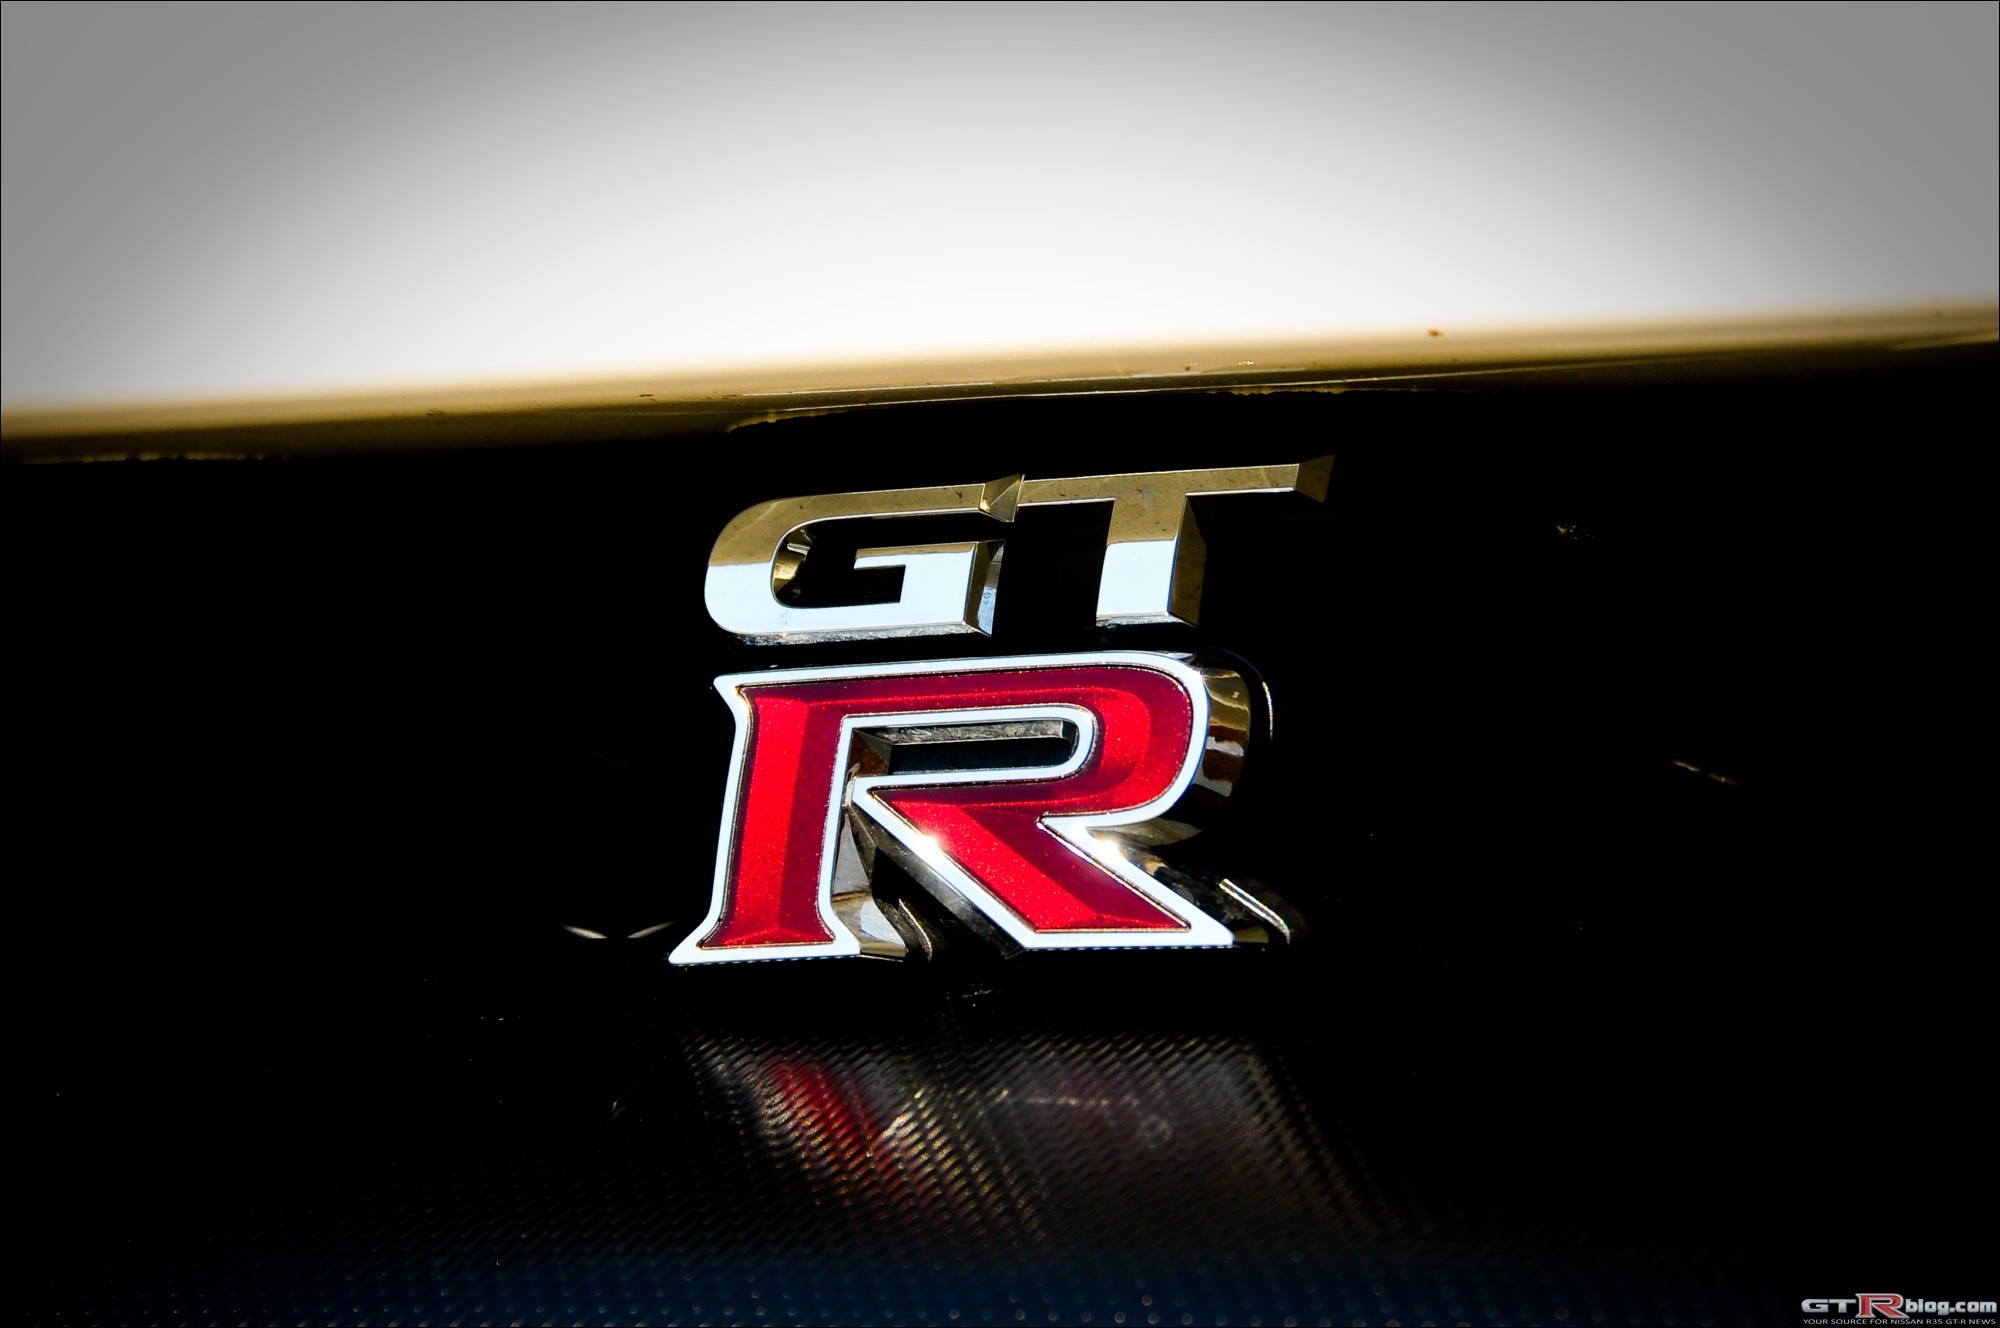 2000x1328 Gtr Logo Pictures. Gtr Logo Pictures On Wallpaper Hd ...